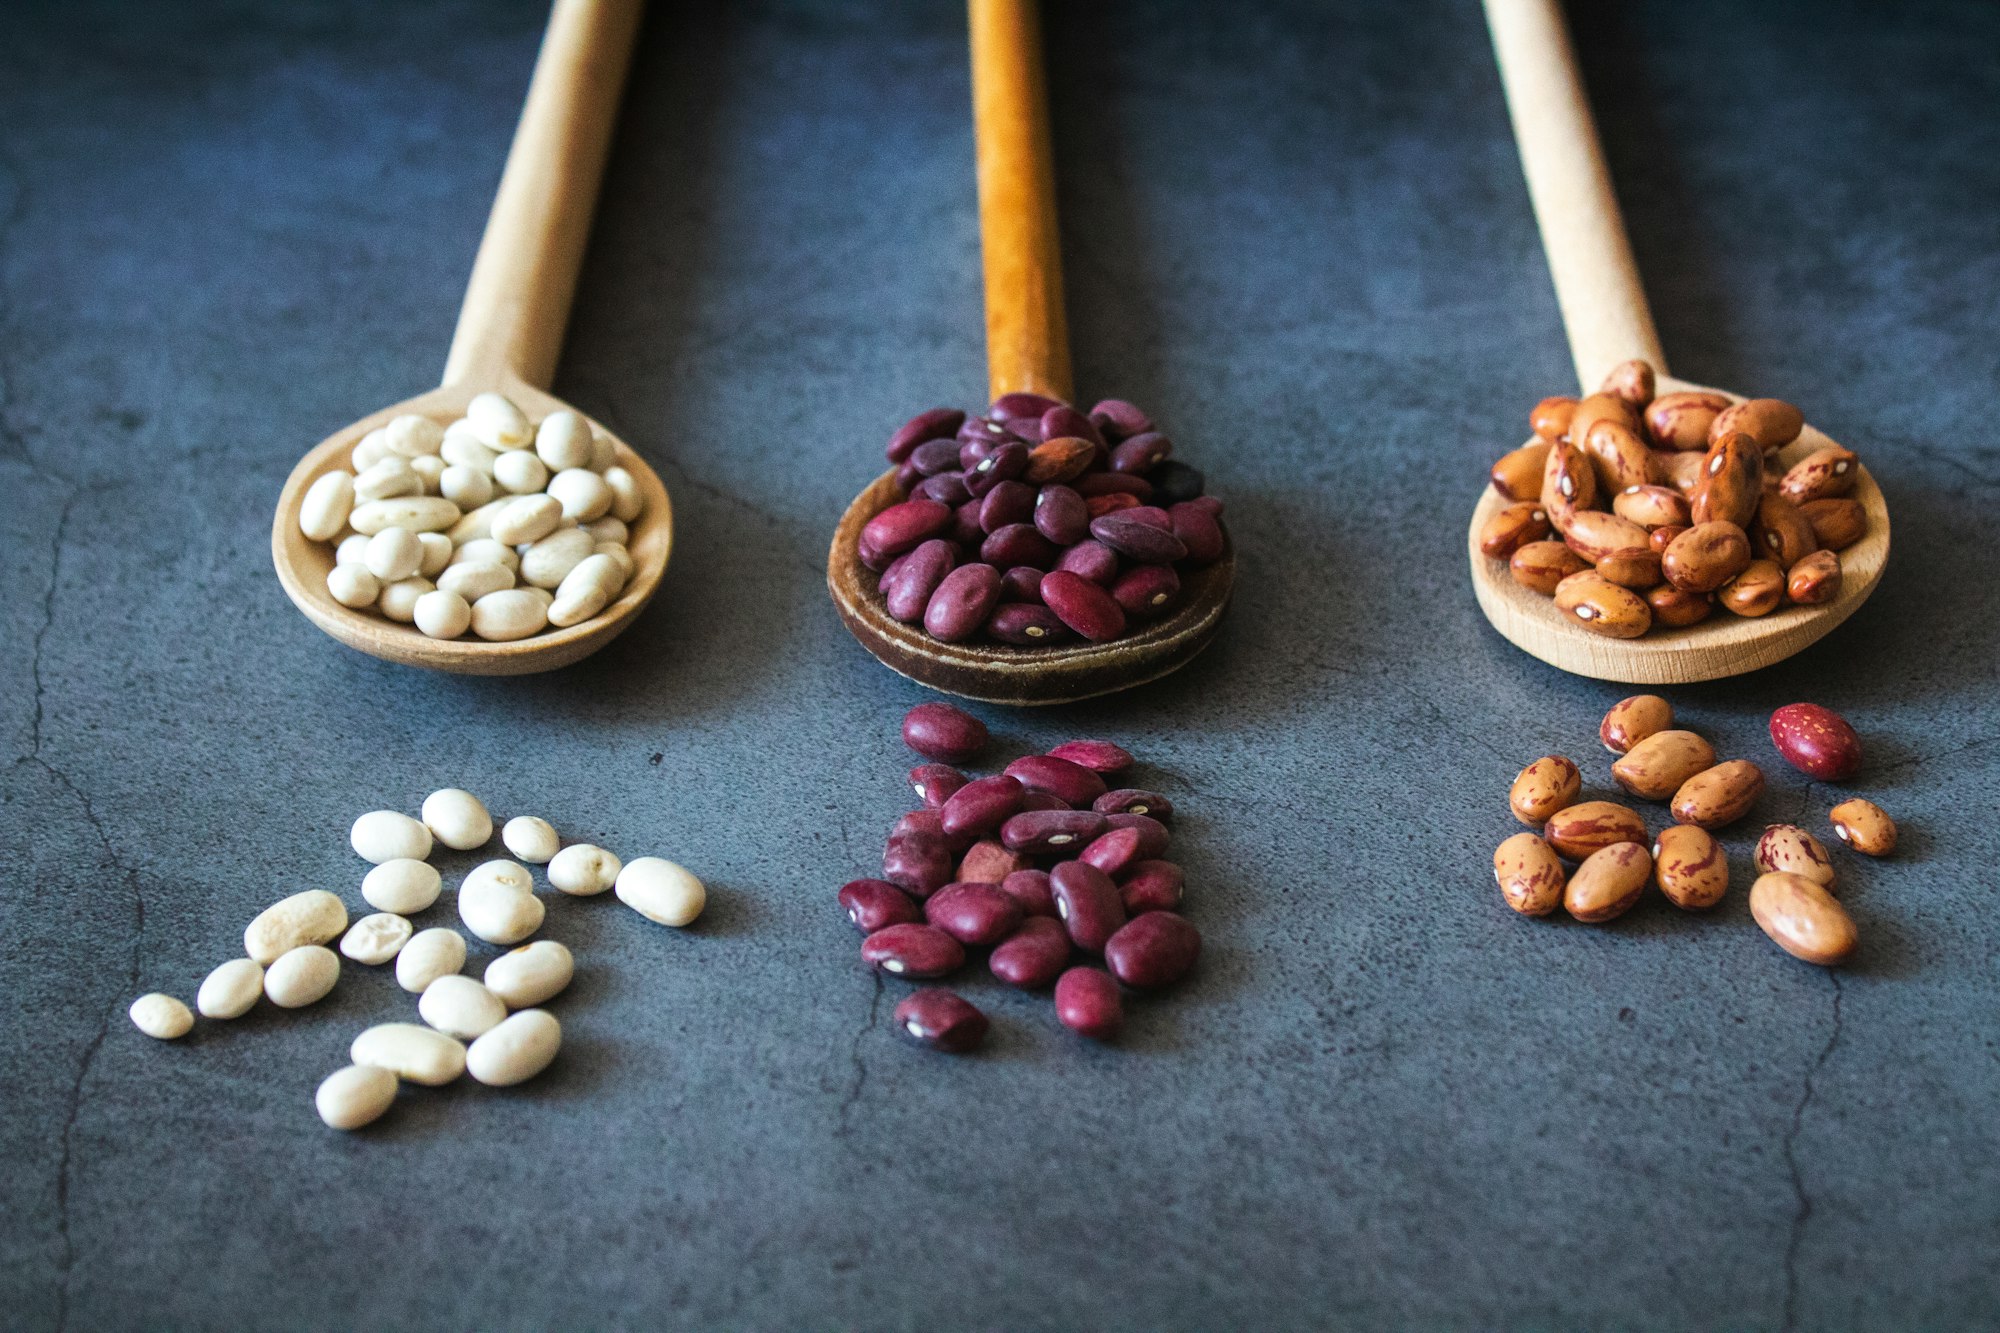 Mexicans stigmatize legumes; bean intake is reduced